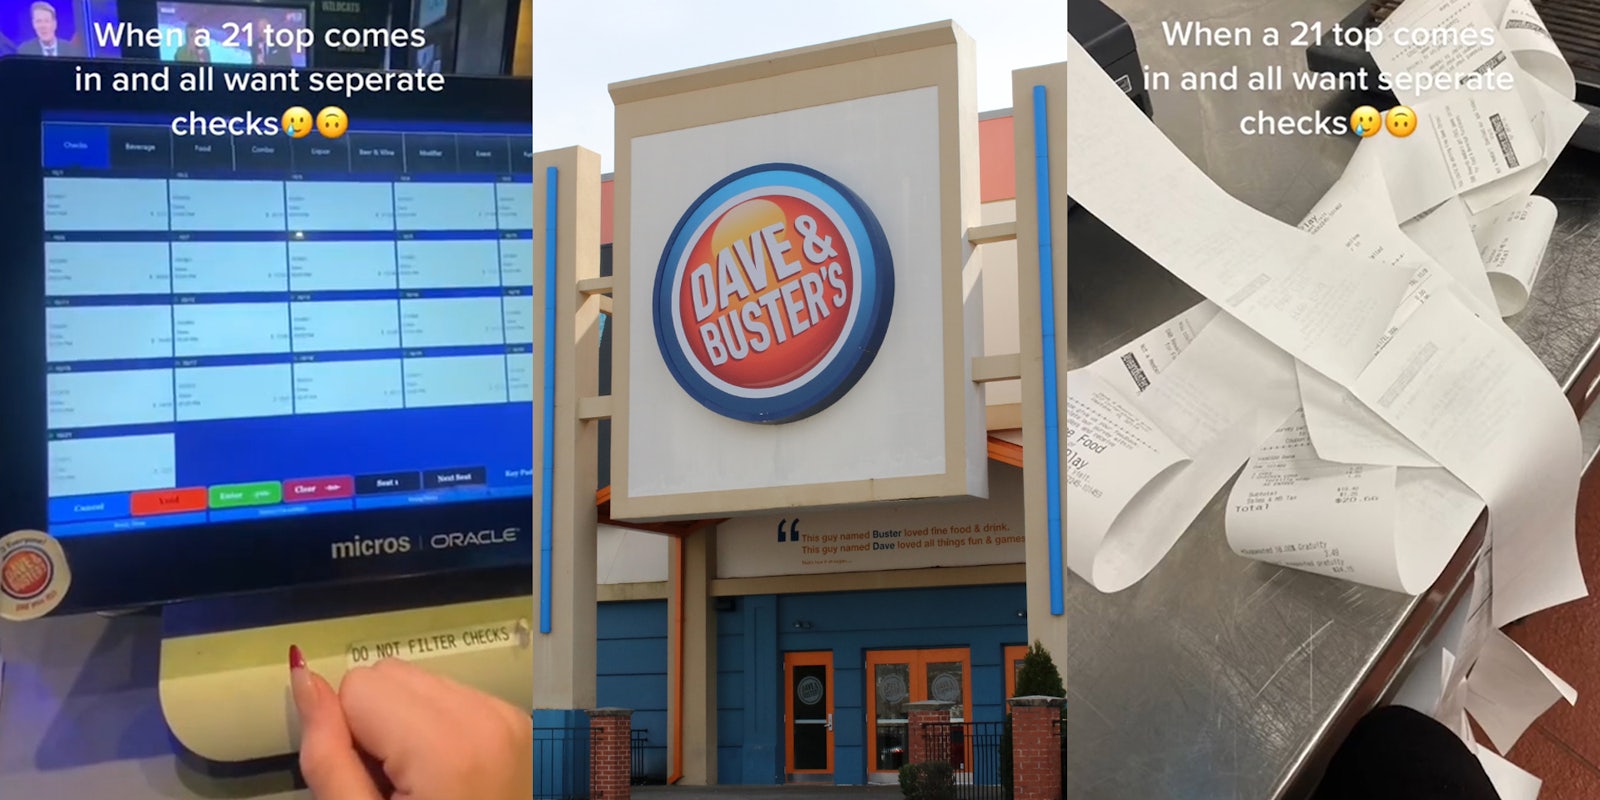 Dave & Buster's POS system screen showing 21 separate checks on screen with caption 'When a 21 top comes in and all want seperate checks' (l) Dave & Buster's building with sign and entrance (c) Dave & Buster's receipts with caption 'When a 21 top comes in and all want seperate checks' (r)